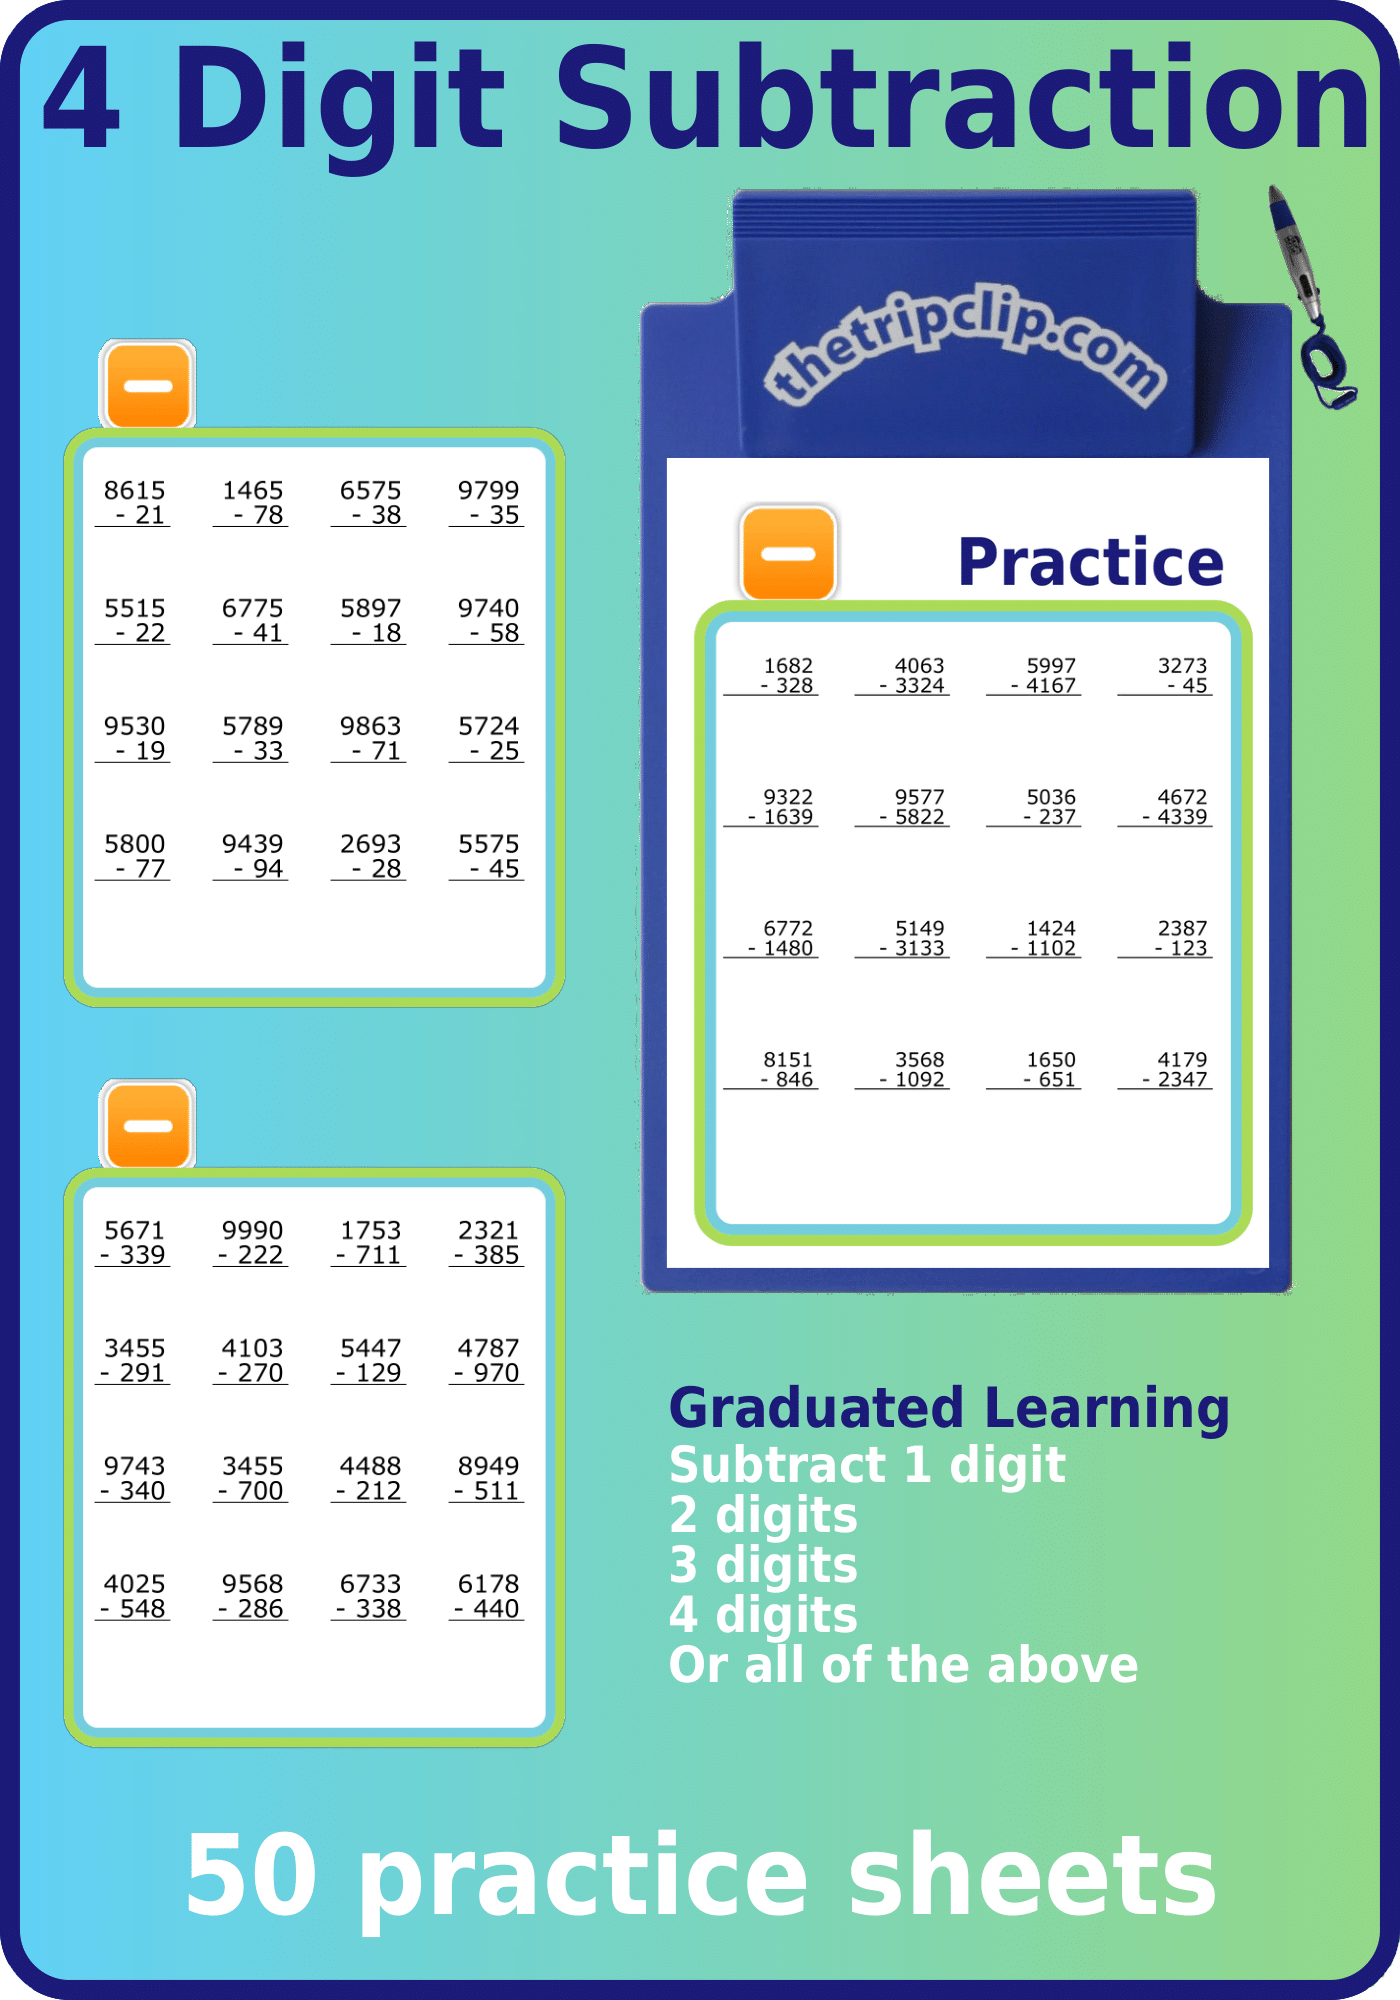 50 math practice sheets subtracting 1, 2, 3, and 4 digit numbers from 4 digit numbers